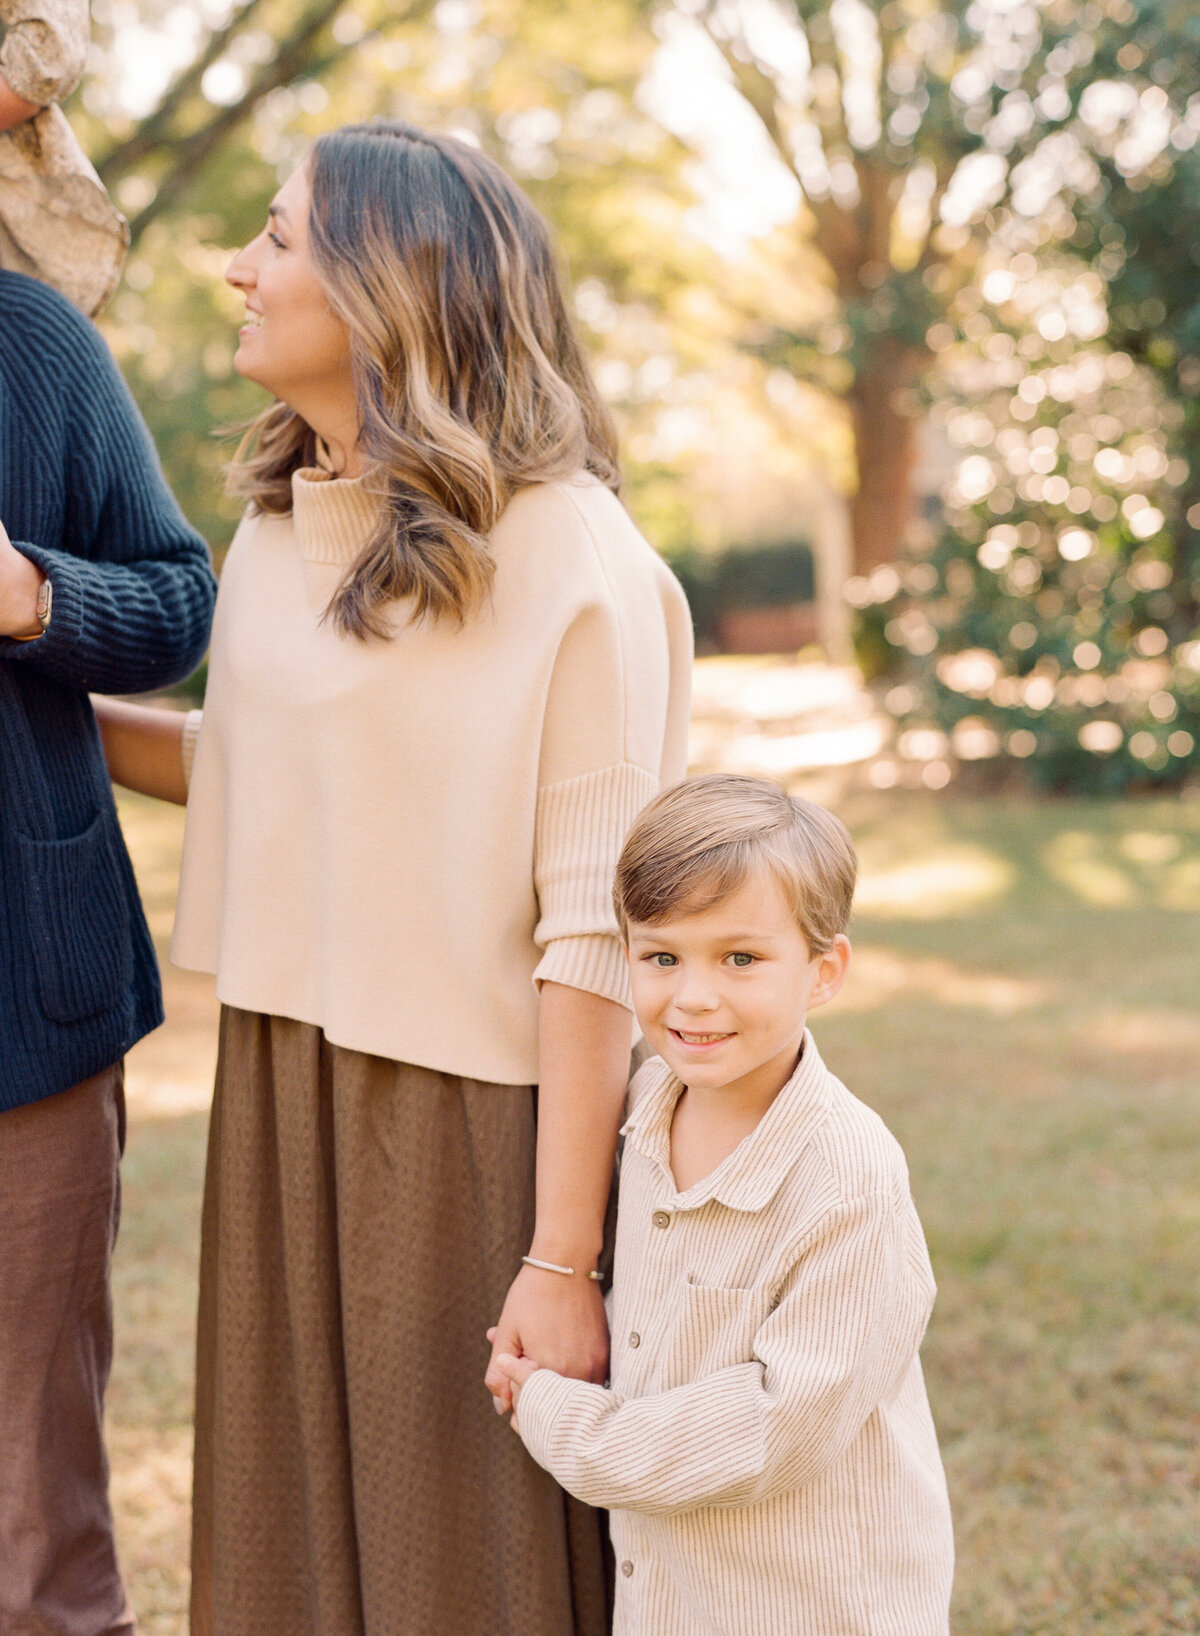 Son holds his mom's hands and smiles at the camera during their Raleigh family photography session. Family walking during their family portrait session in Wake Forest, NC. Photographed by Raleigh family photographer A.J. Dunlap Photography.